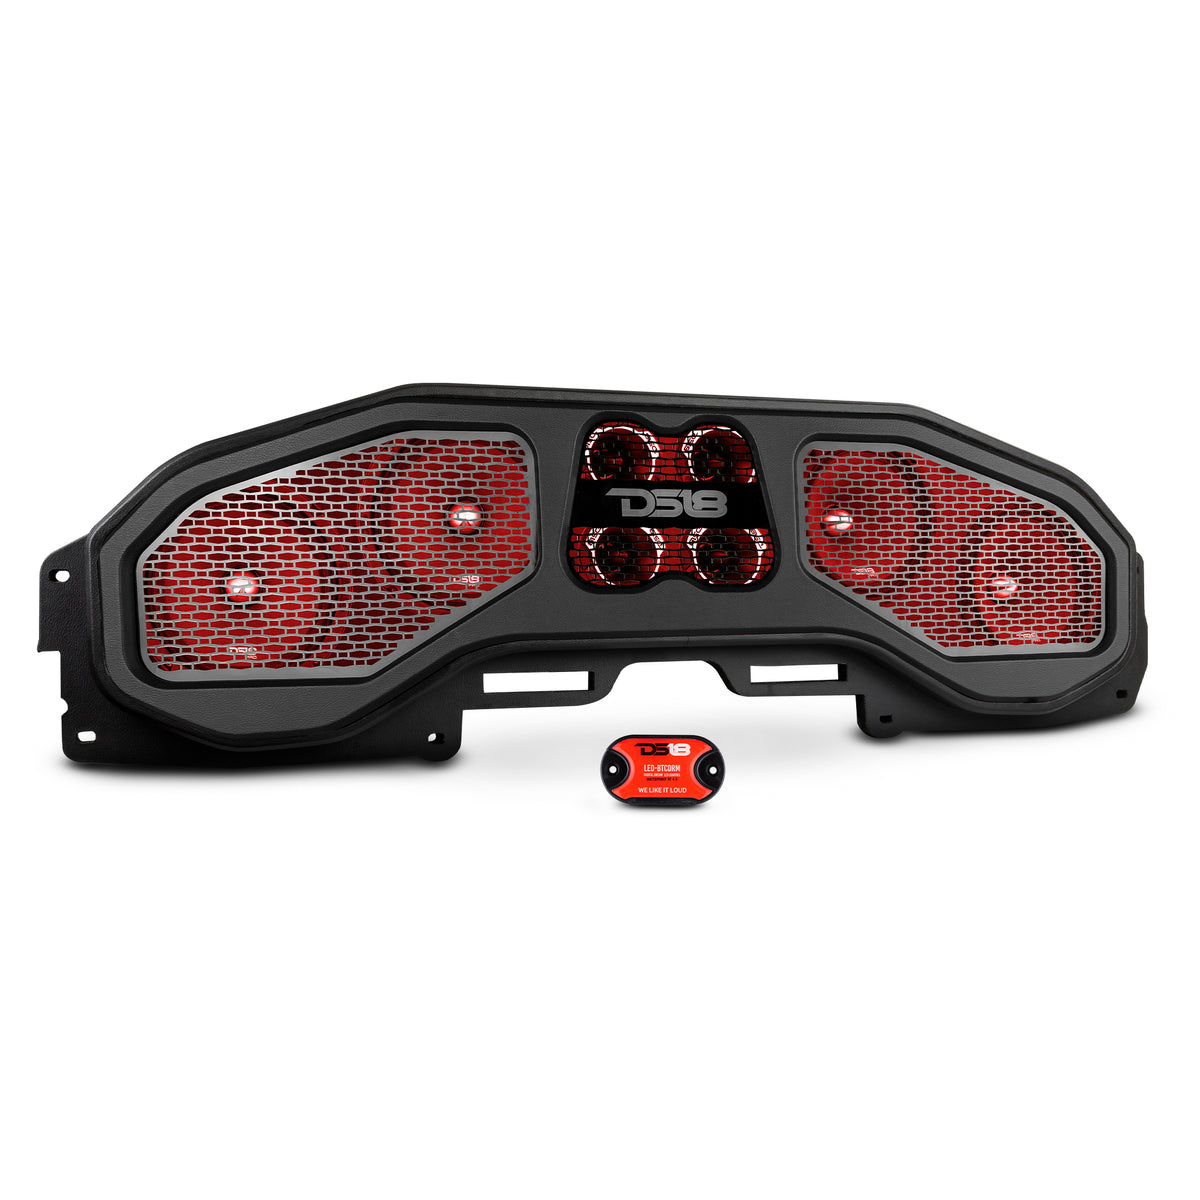 Jeep JL, JT Overhead Loaded Sound Bar With Vinyl Finish and Dream LED Lights 4 X 8" and 4 X 3.8" Tweeters (MADE IN USA) - Speakers Included